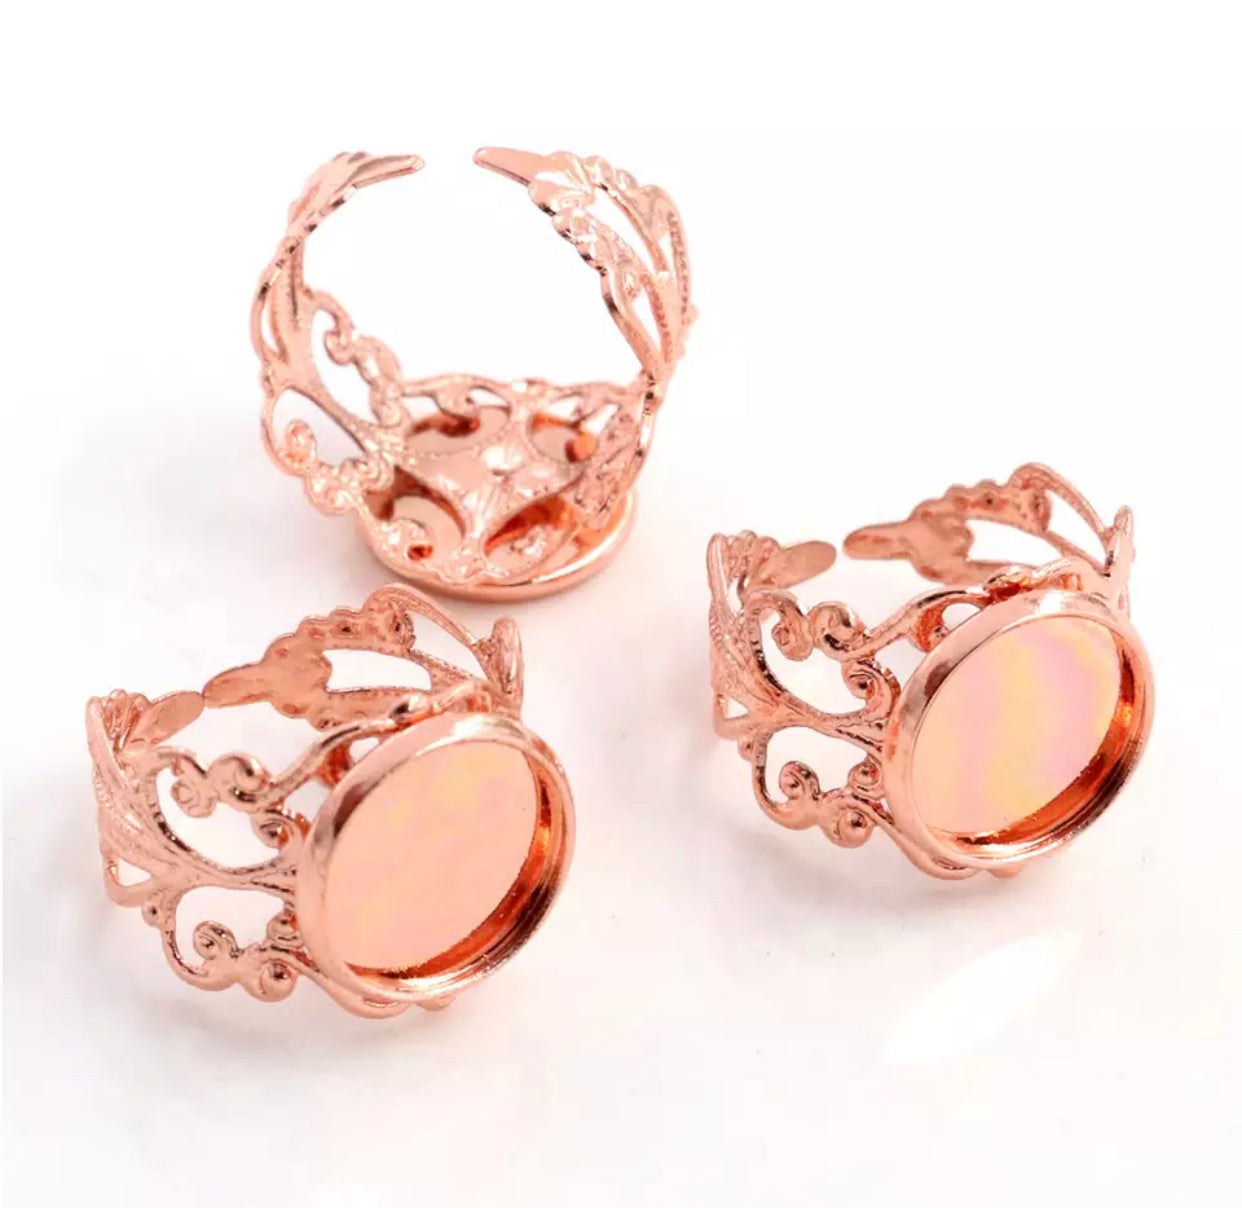 2pcs, 12mm, adjustable lead free and nickel free Copper Ring Components, with round Cabochon Setting In RoseGold